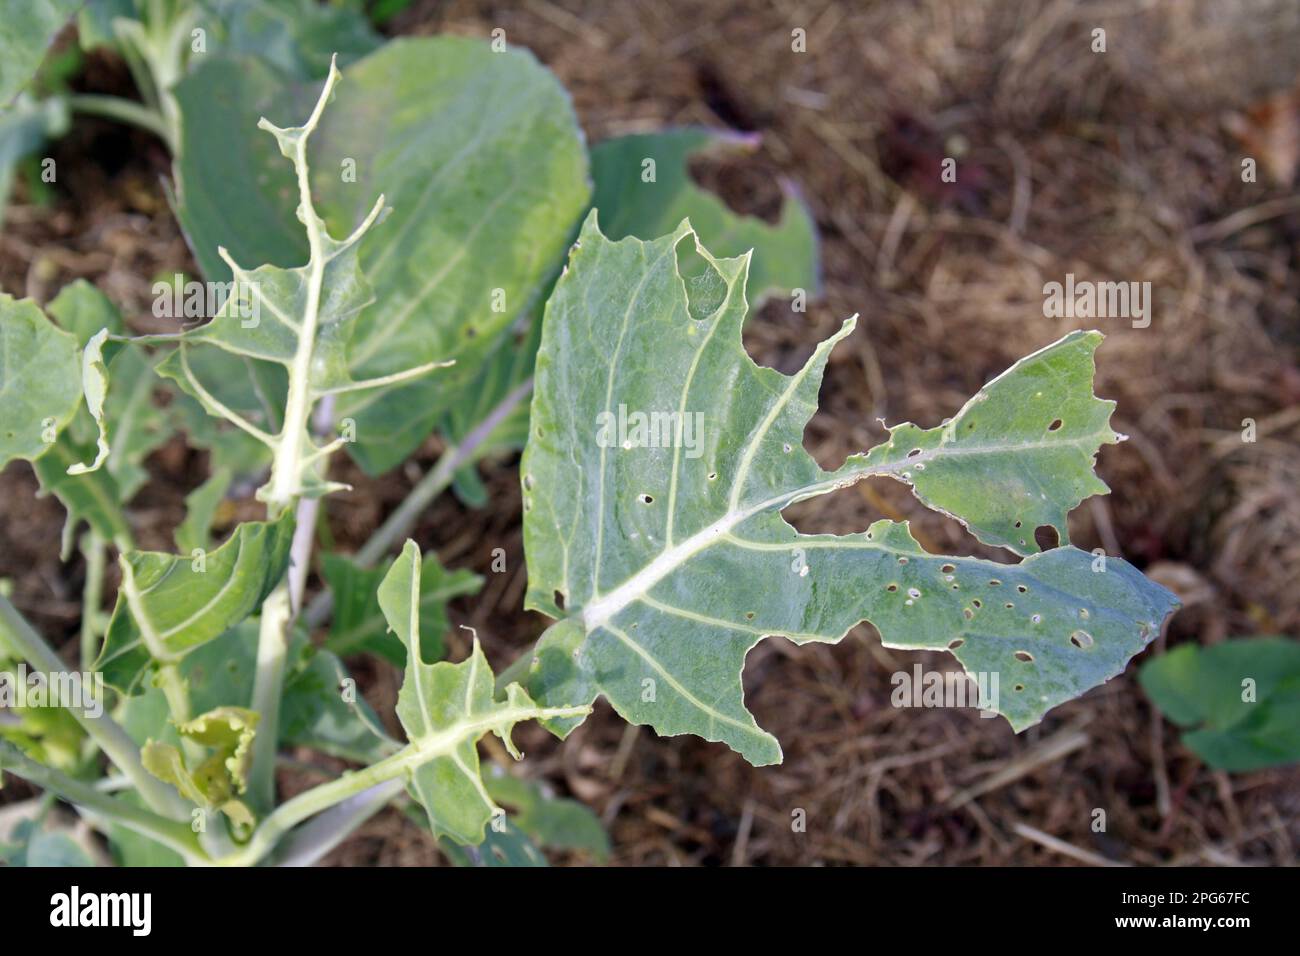 Harvest of vegetable cabbage (Brassica oleracea), close-up of leaf showing feeding damage by the caterpillars Large white cabbage butterfly (Pieris Stock Photo